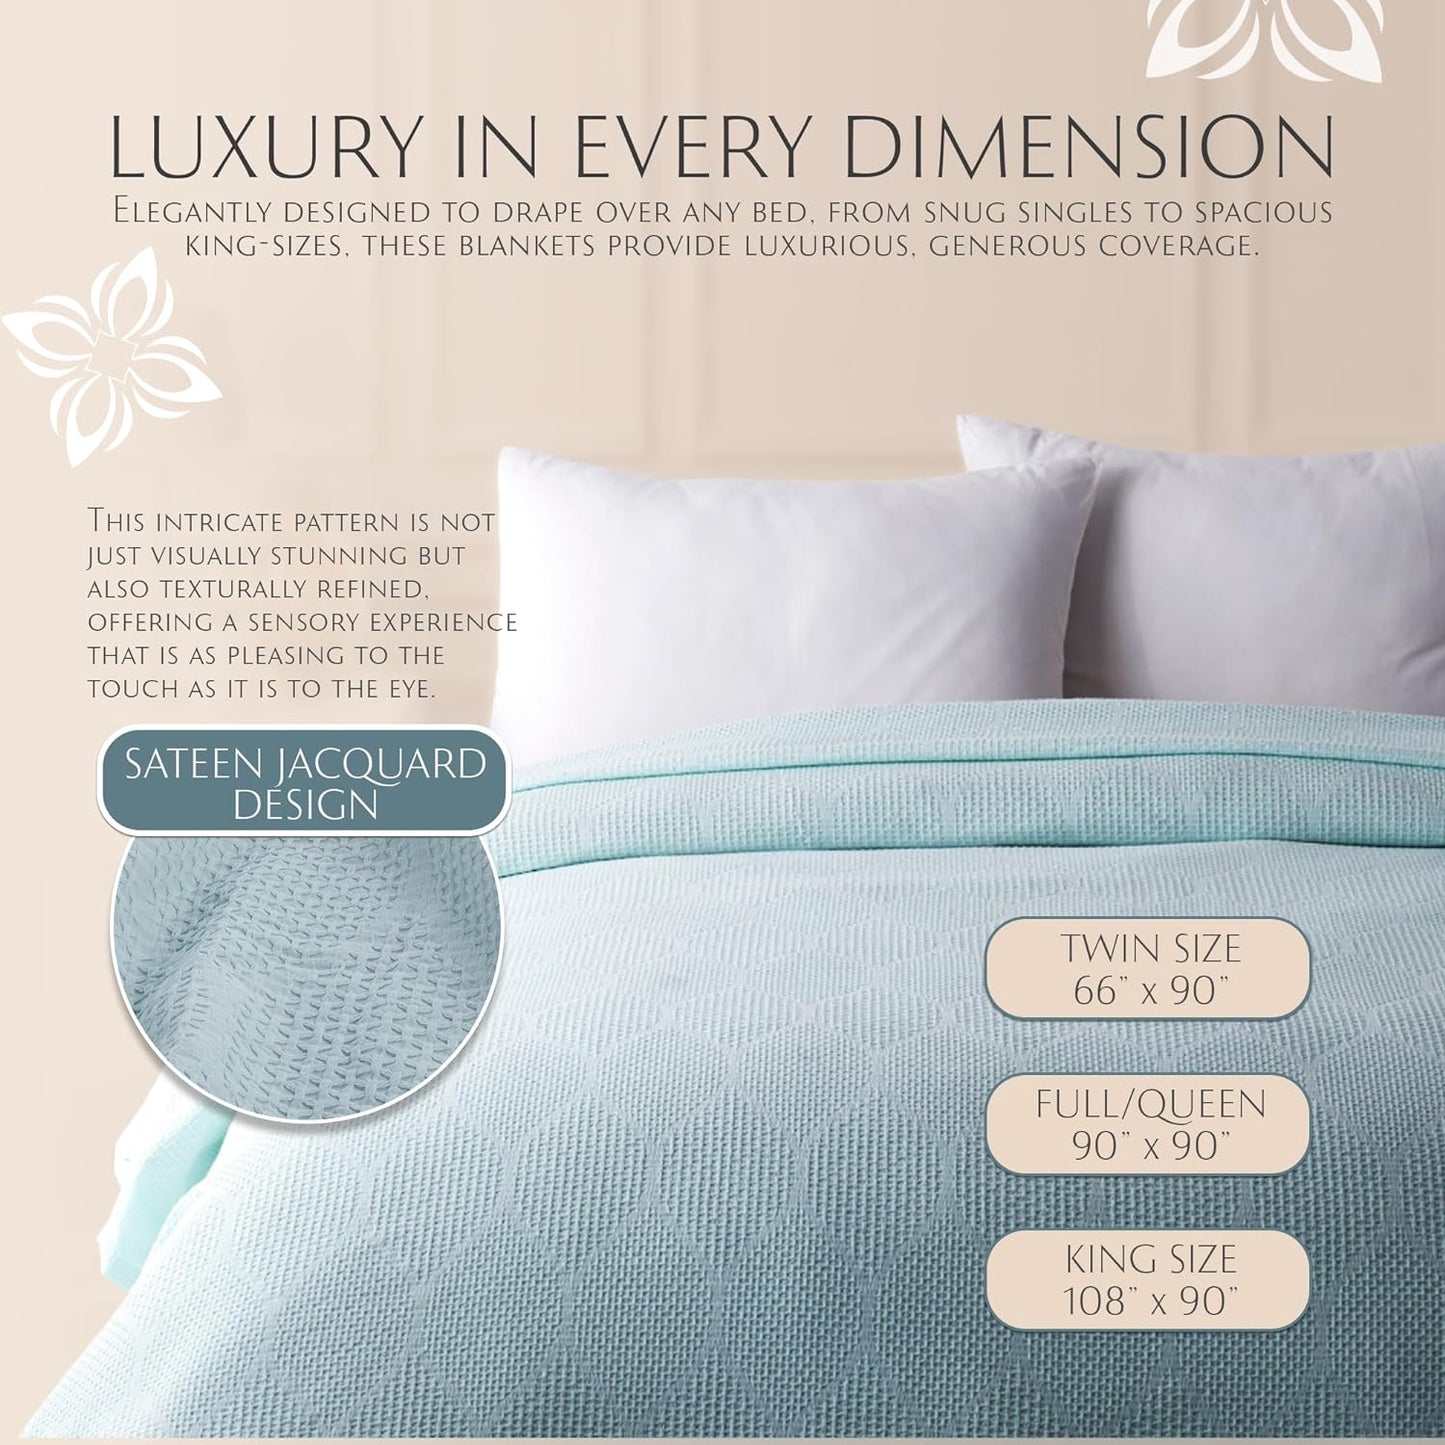 Thin Lightweight Cotton Blankets Skin-Friendly, Breathable, and Fade-Resistant -Modern Bedding Essentials for Year-Round Comfort, Style, and Quality Sleep Experience. Twin Size 66”X 90” Seafoam